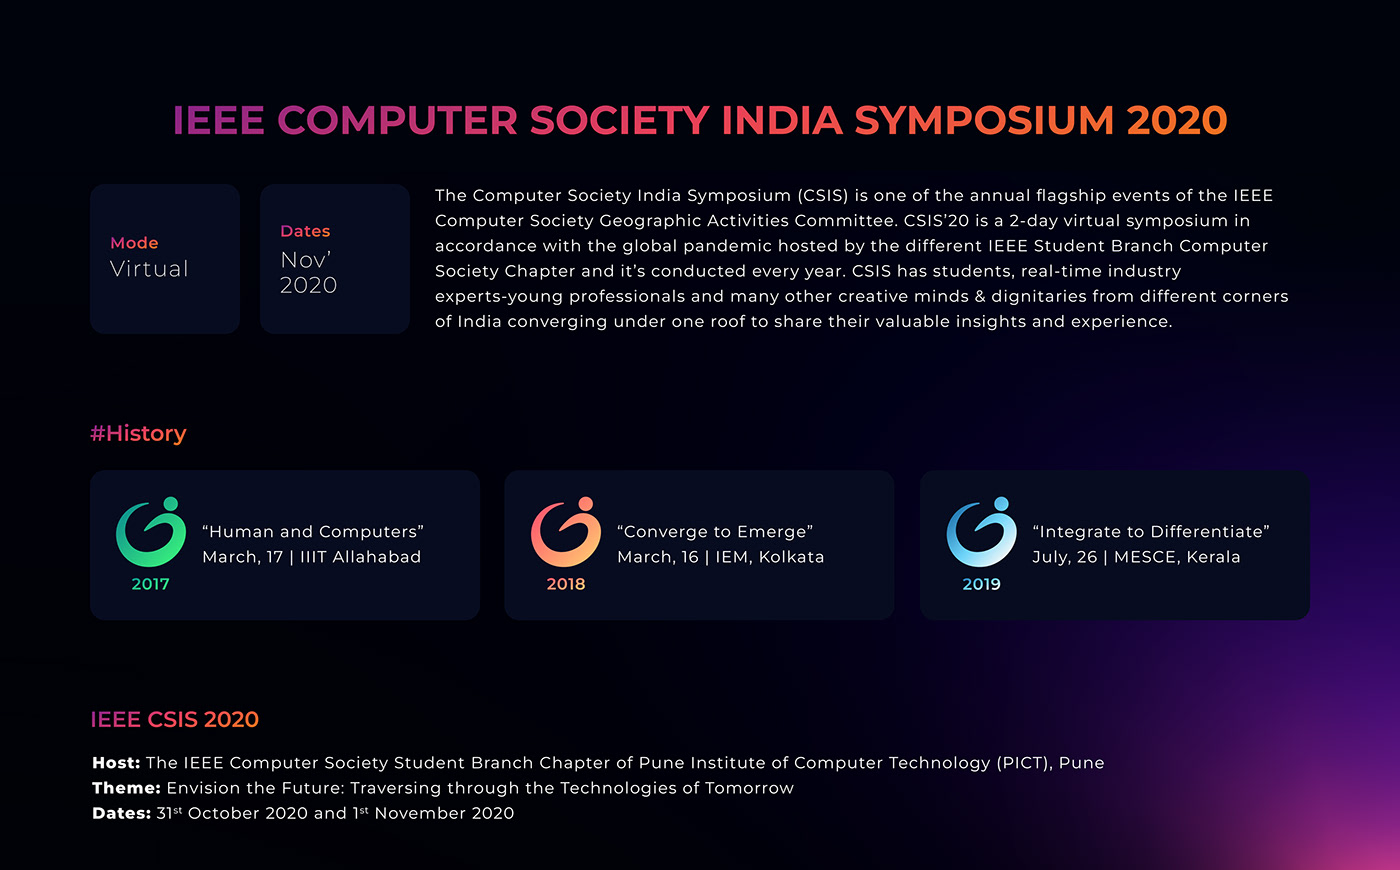 computersociety conference CSIS  Event ieee IEEECS India PUNE symposium virtual